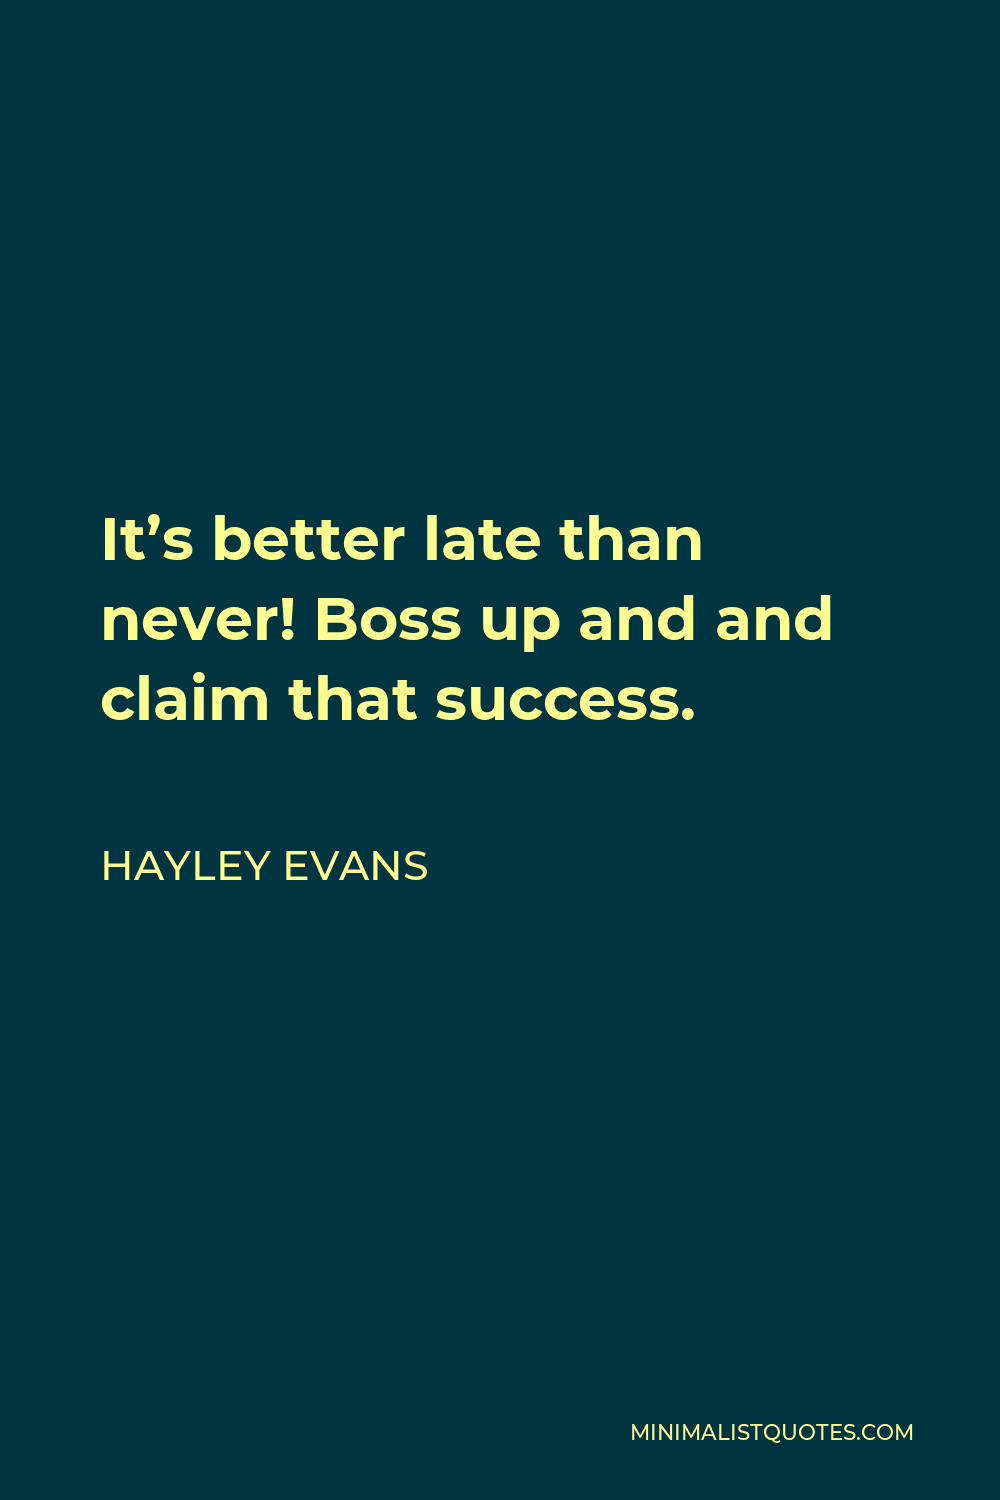 Hayley Evans Quote - It’s better late than never! Boss up and and claim that success.